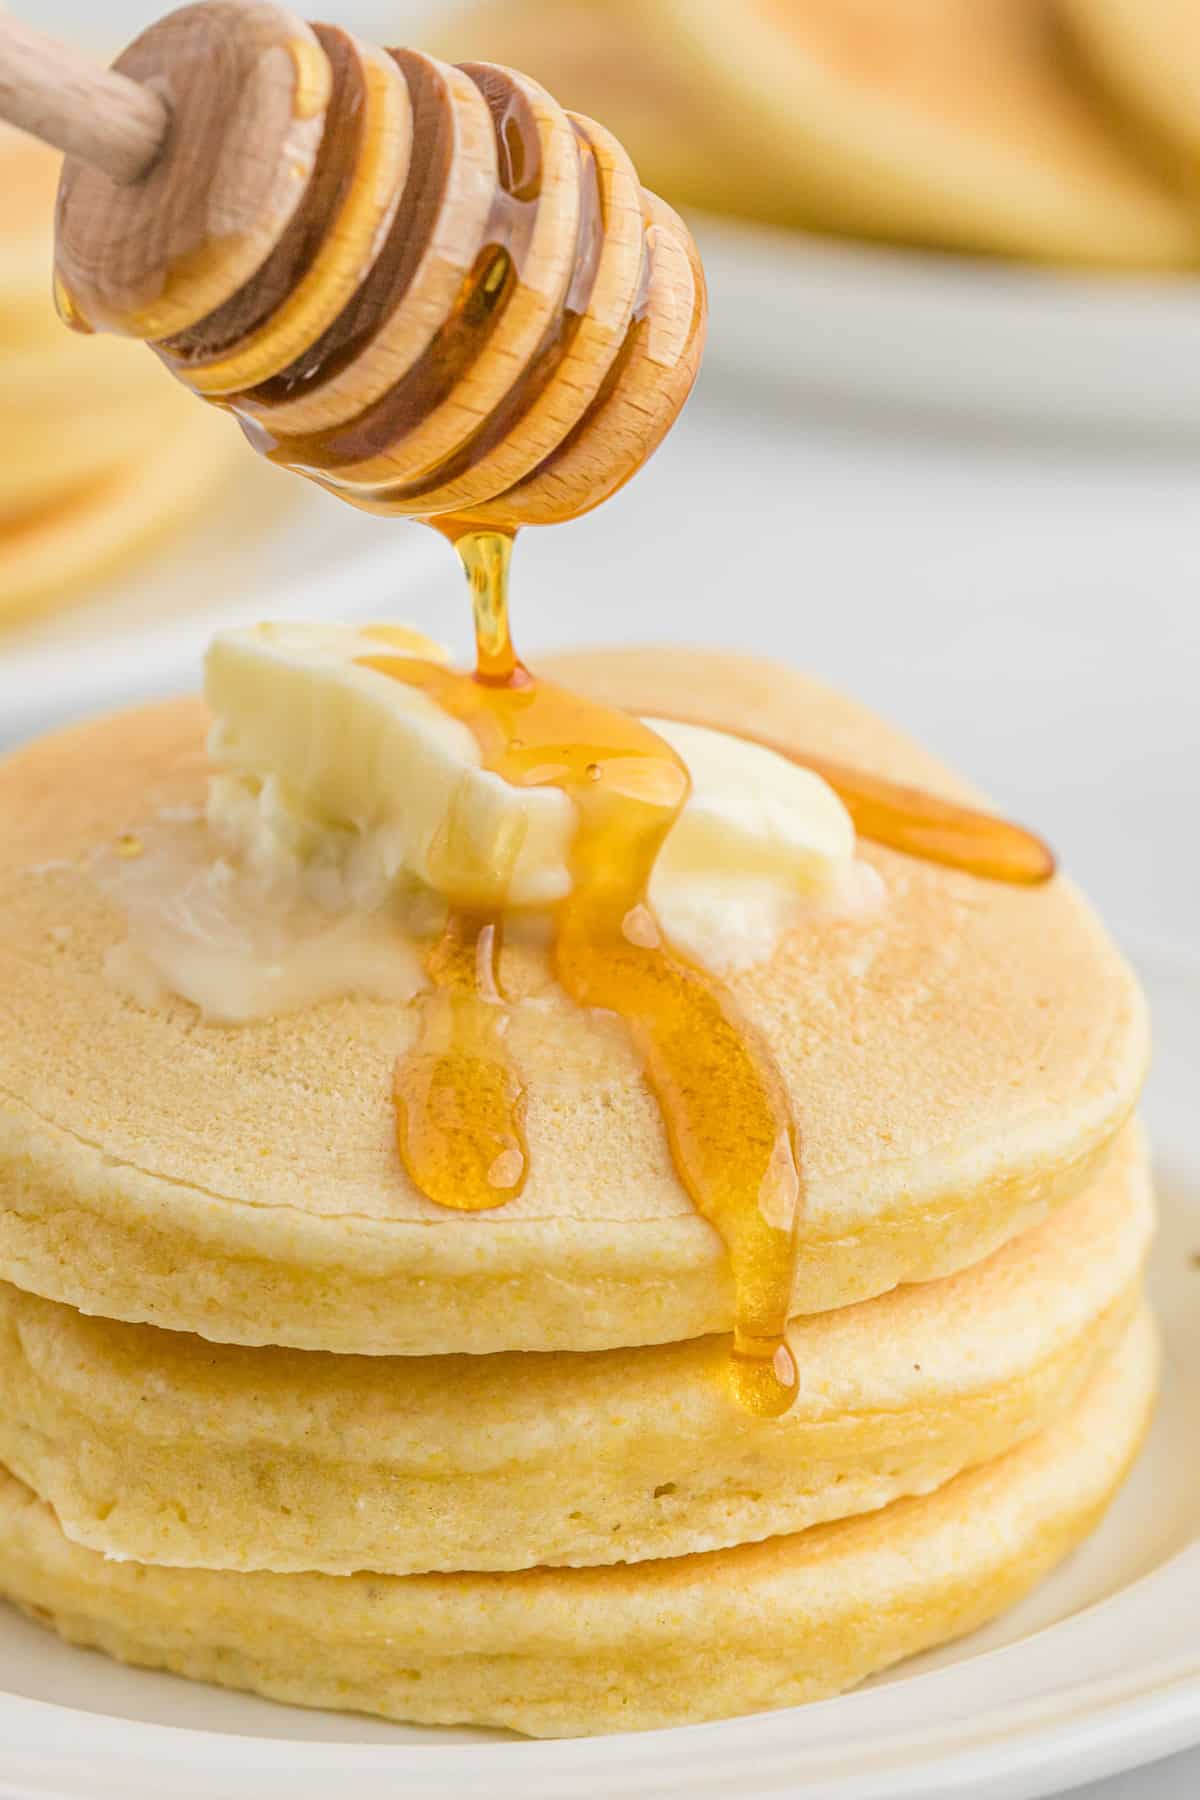 Syrup being drizzled on cornmeal pancakes with butter.